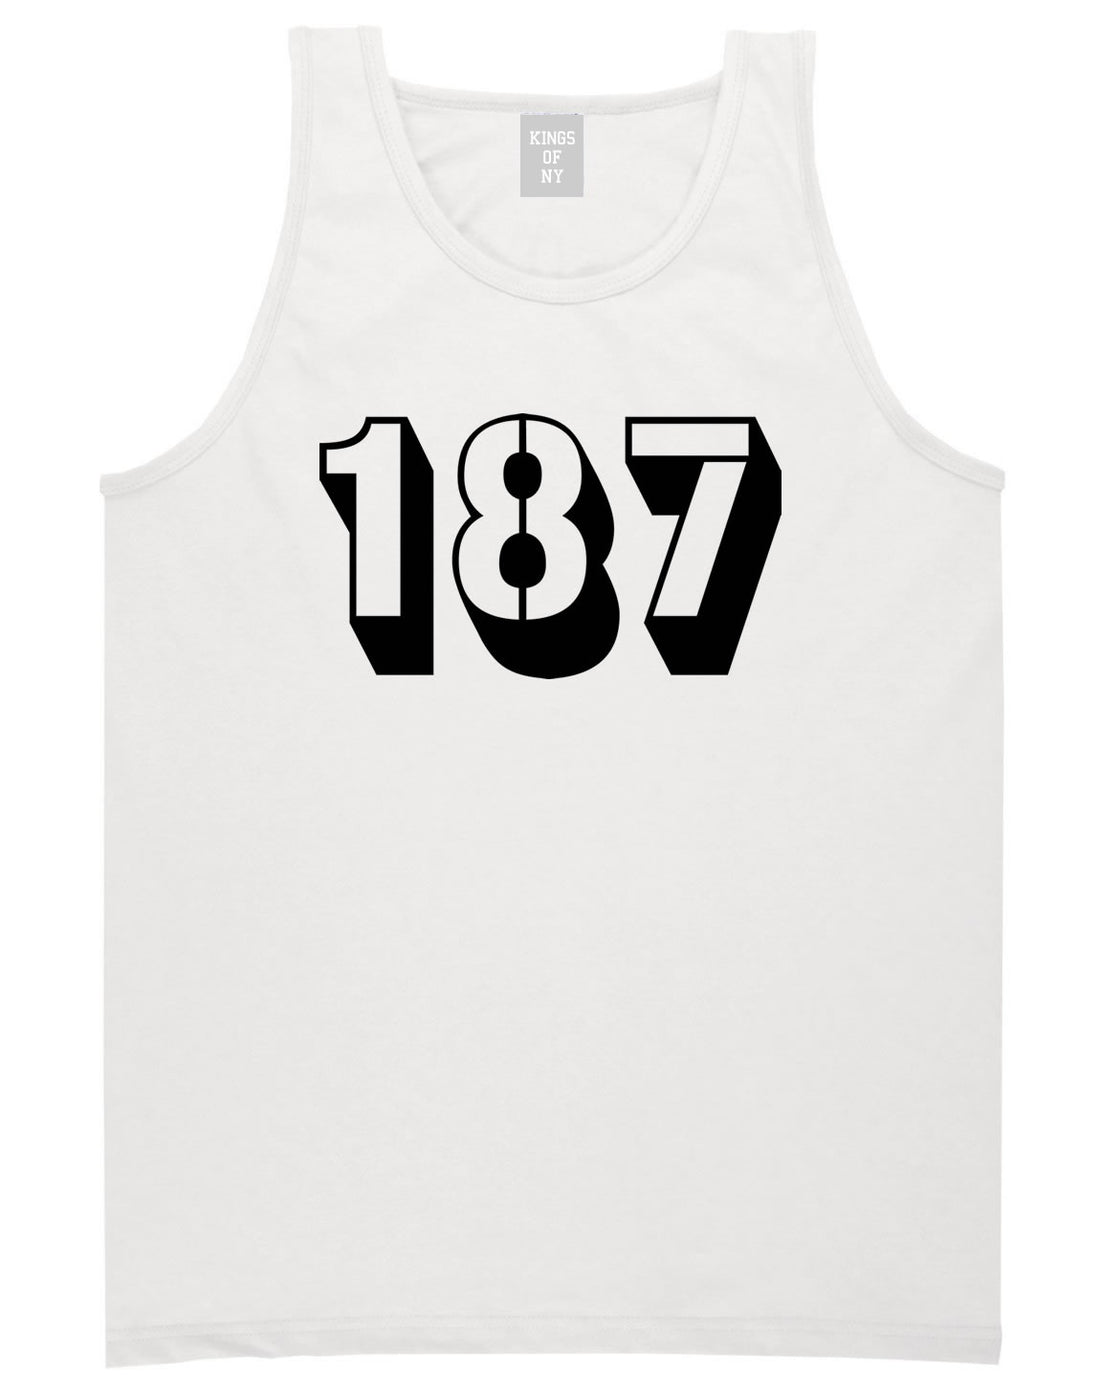 187 Tank Top in White by Kings Of NY